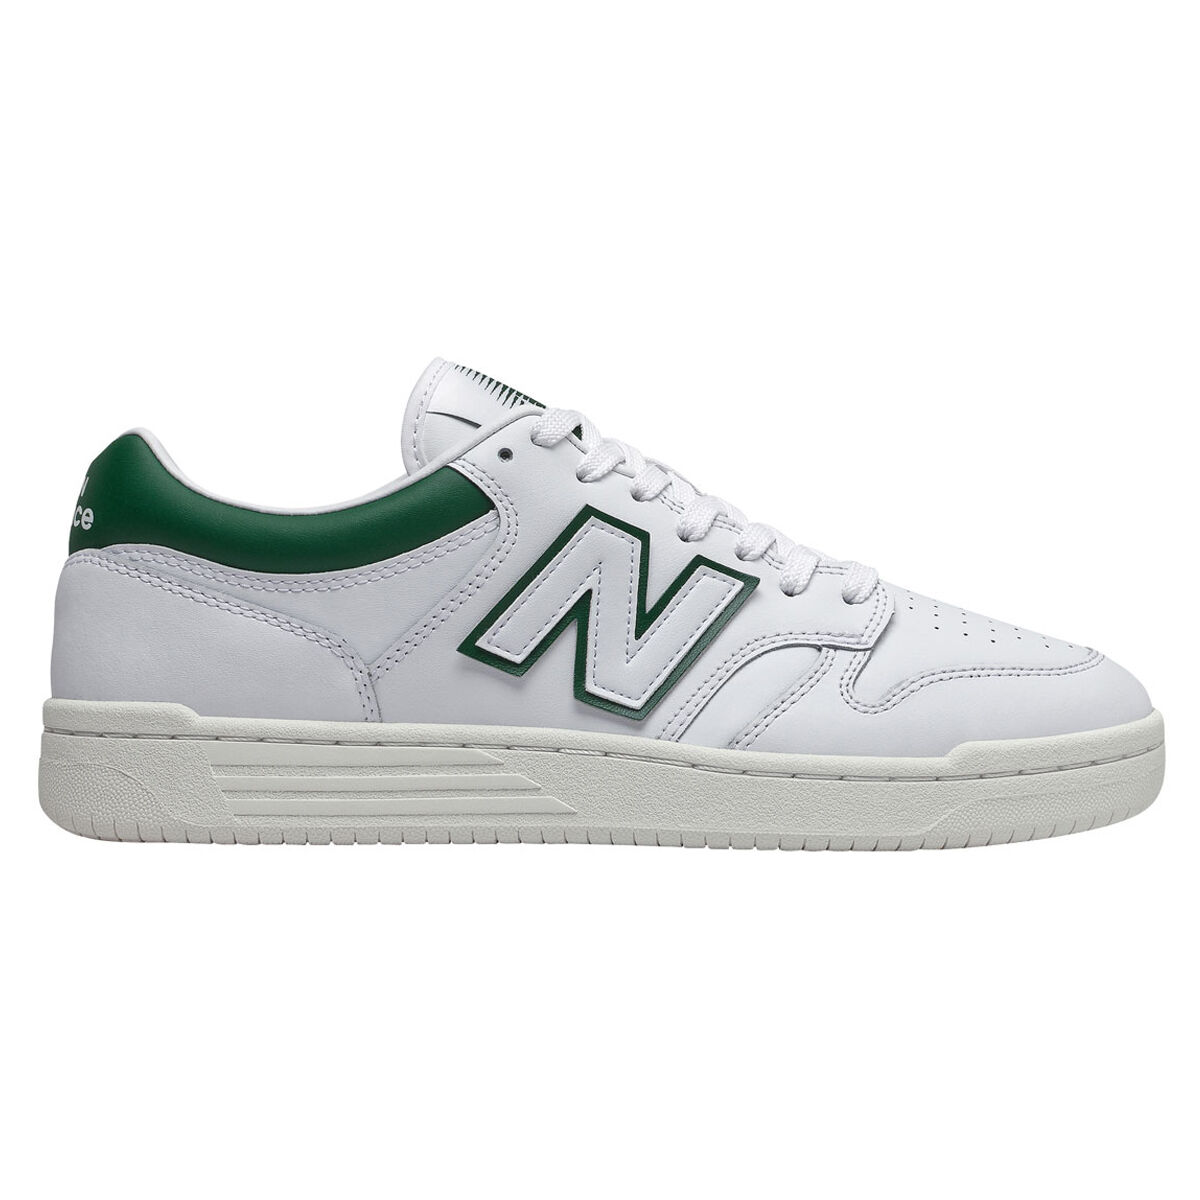 Seis Grillo Municipios New Balance BB480 Mens Casual Shoes White/Green US 8 | Rebel Sport